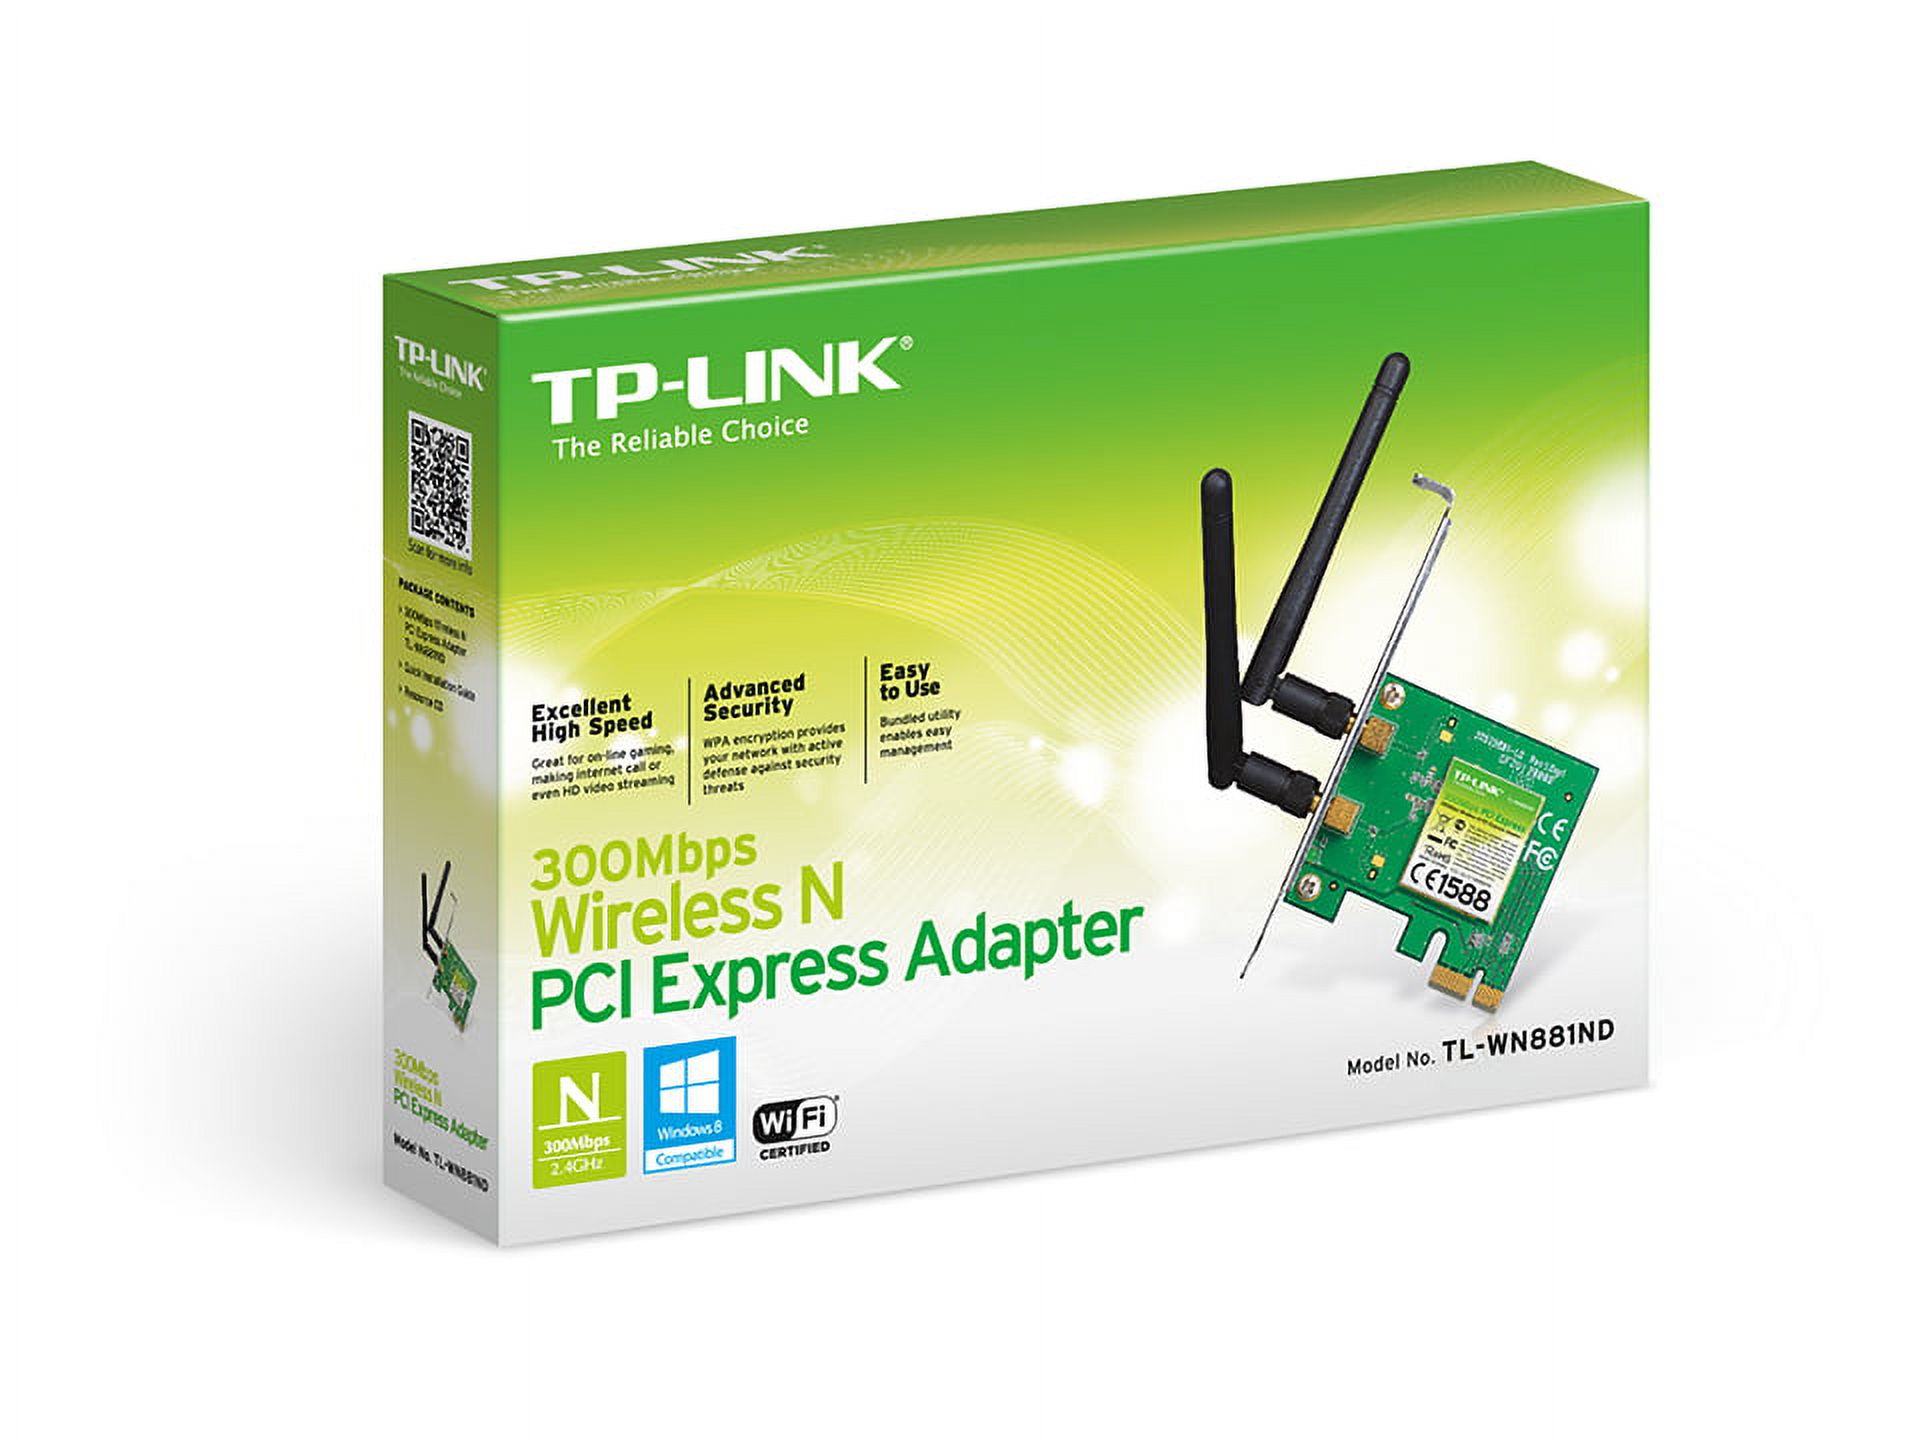 TP-Link N300 Wi-Fi PCI-Express Adapter (TL-WN881ND) - image 2 of 2